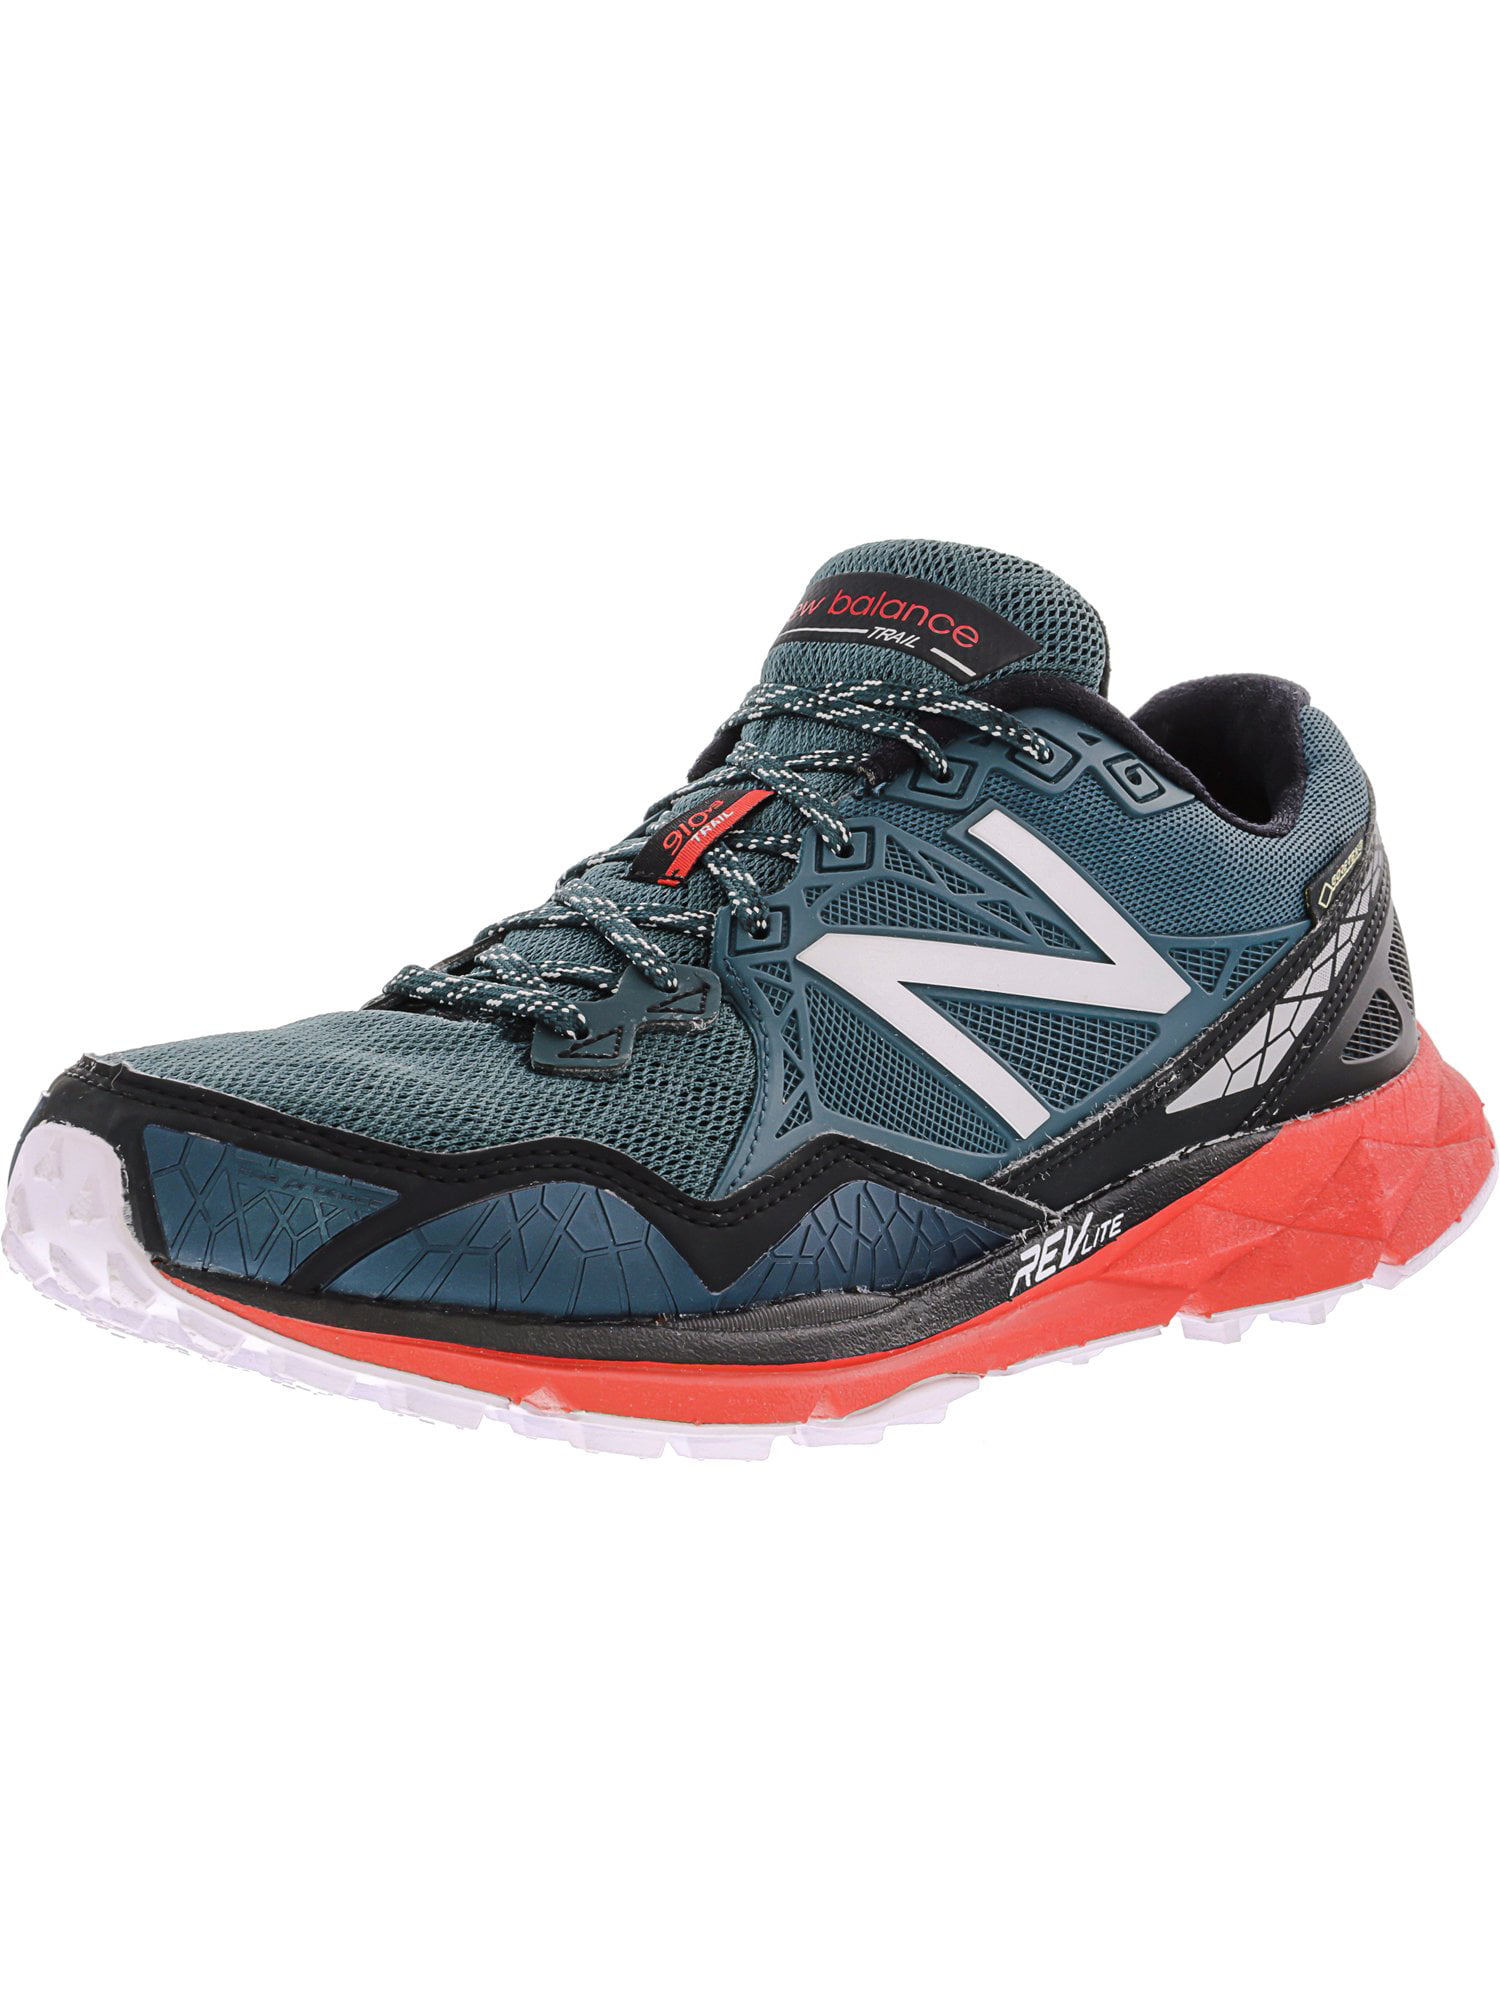 New Balance Men's Mt910 Gy3 Ankle-High 